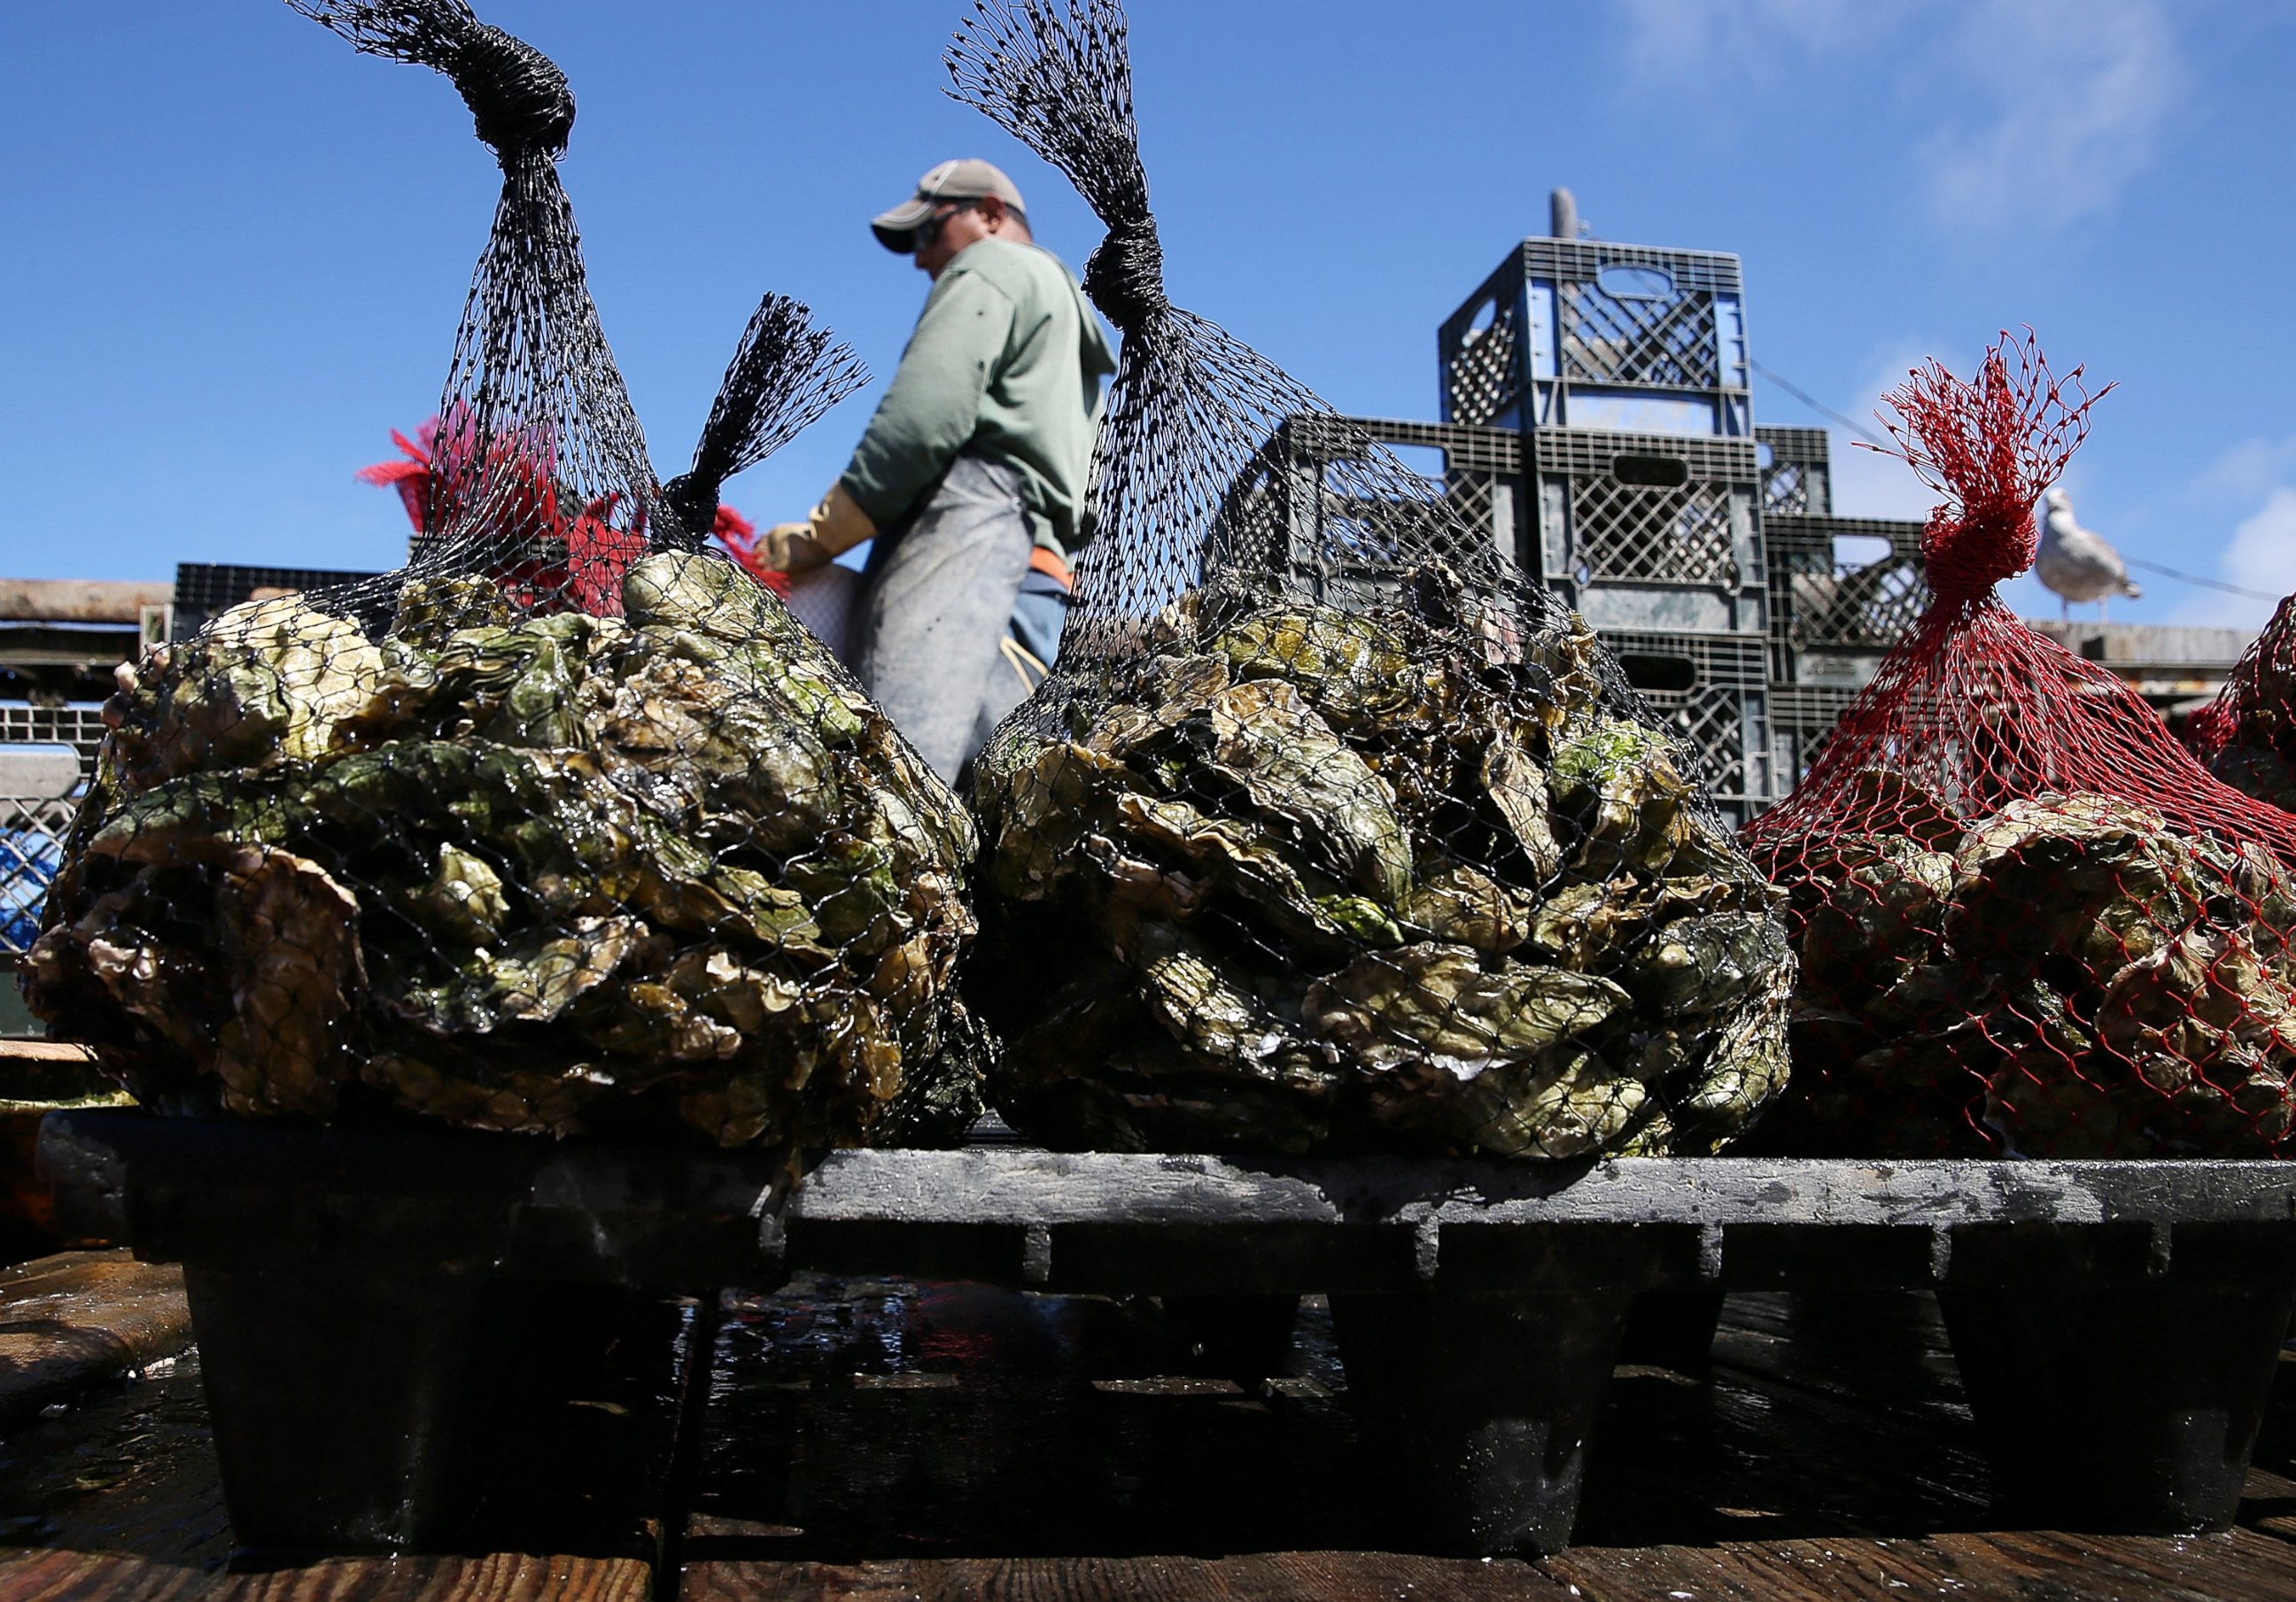 PHOTO: A Drakes Bay Oyster Co. worker sorts freshly harvested oysters on September 4, 2013 in Inverness, Calif. 